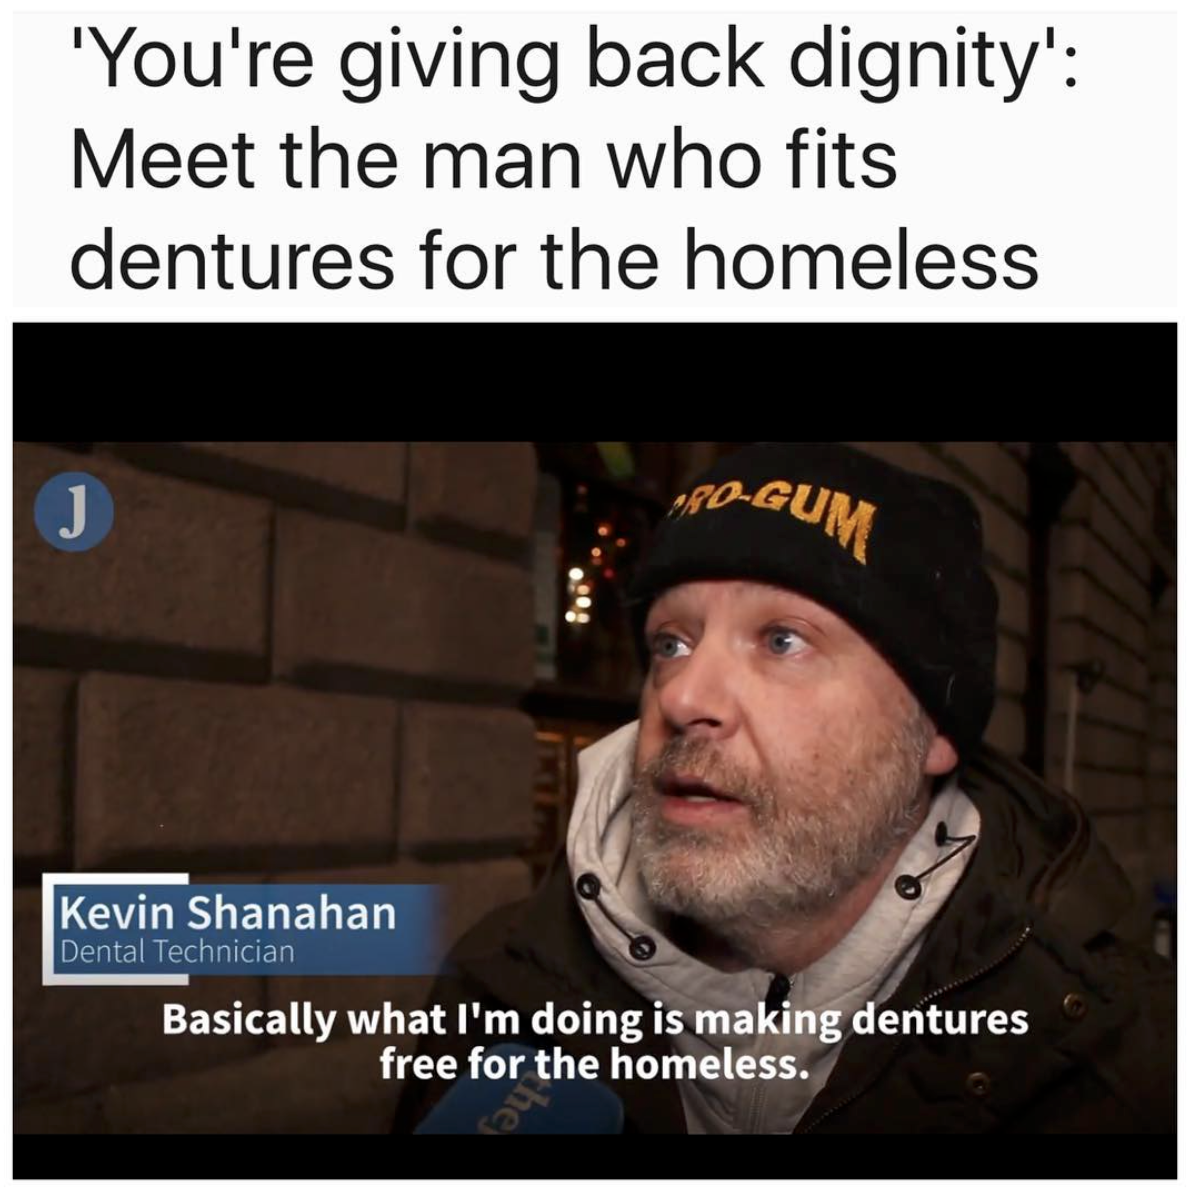 wholesome memes and pics - photo caption - 'You're giving back dignity' Meet the man who fits dentures for the homeless J Kevin Shanahan Dental Technician 1ROGum Basically what I'm doing is making dentures free for the homeless.